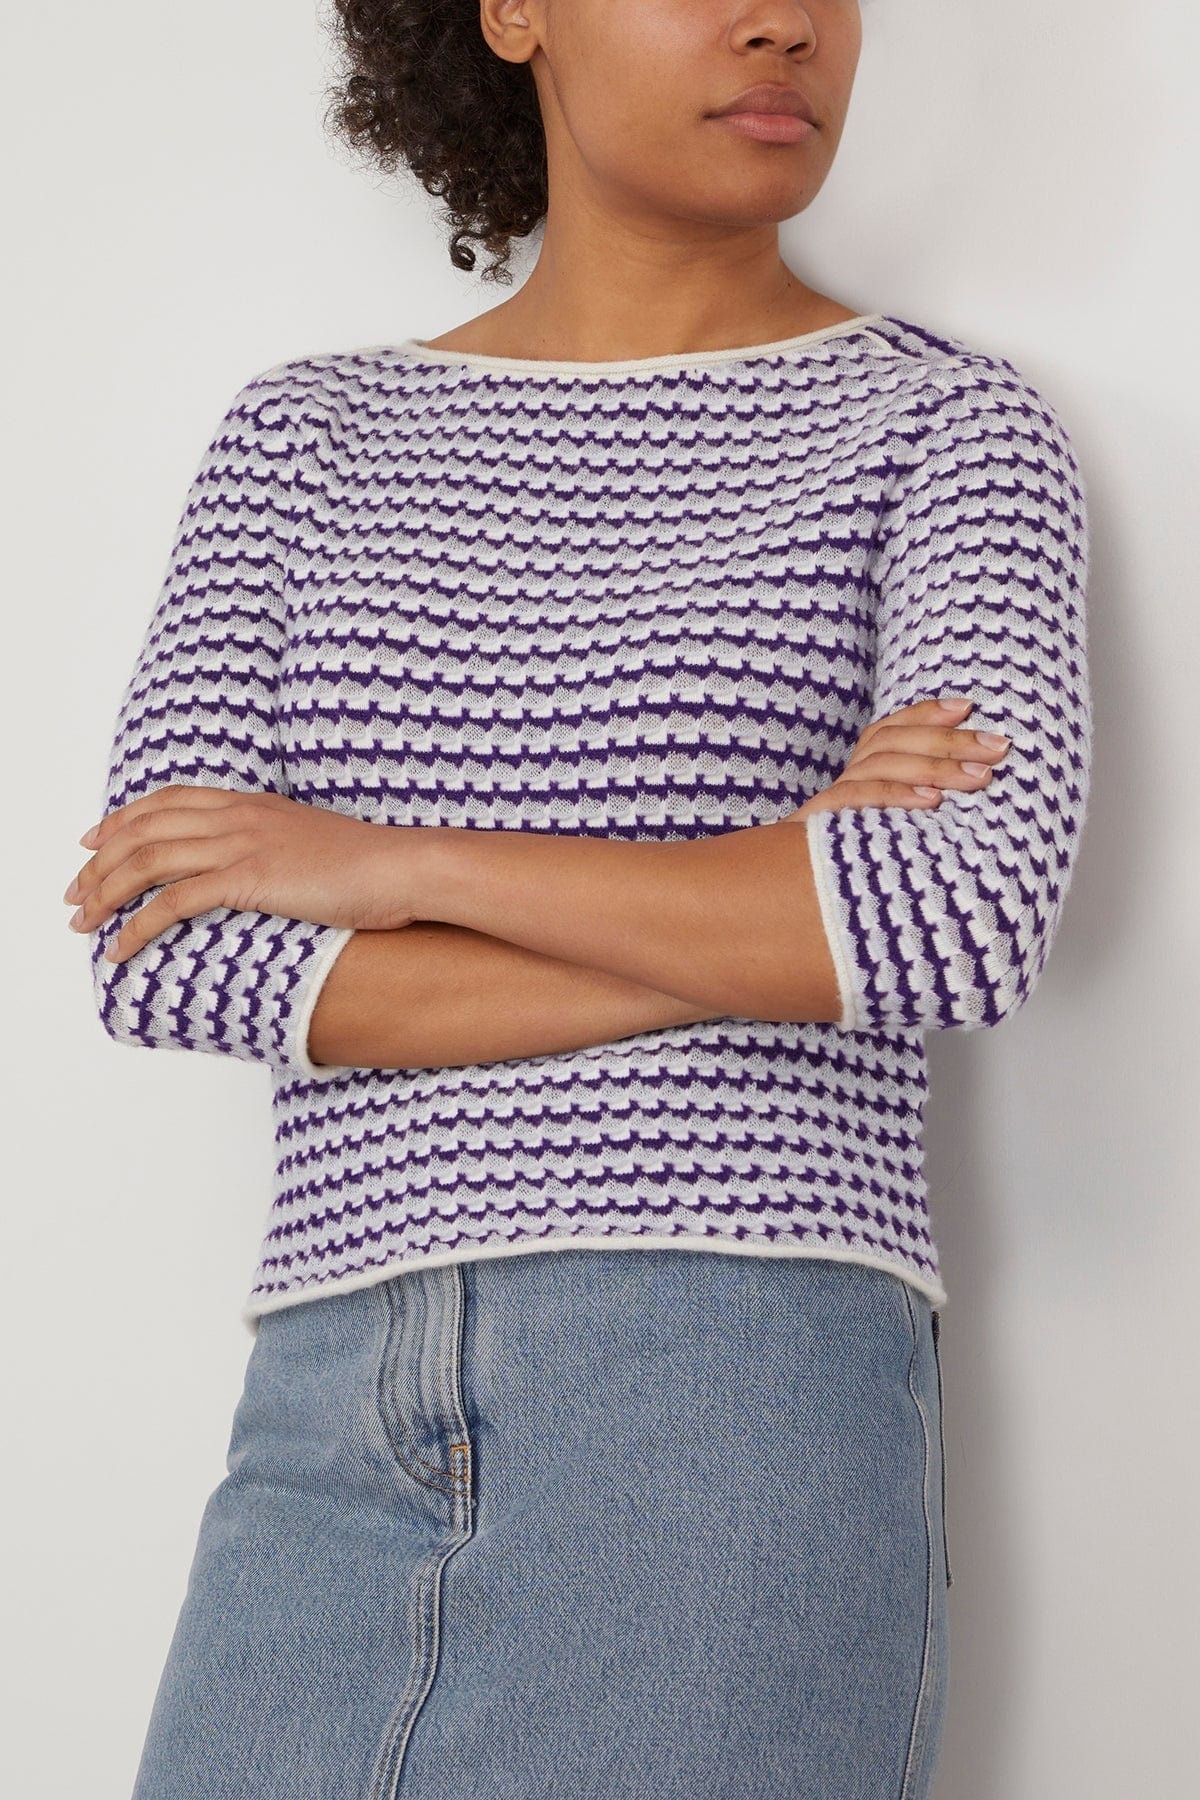 Playful Softness Pullover in Purple Blue White Mix - 3